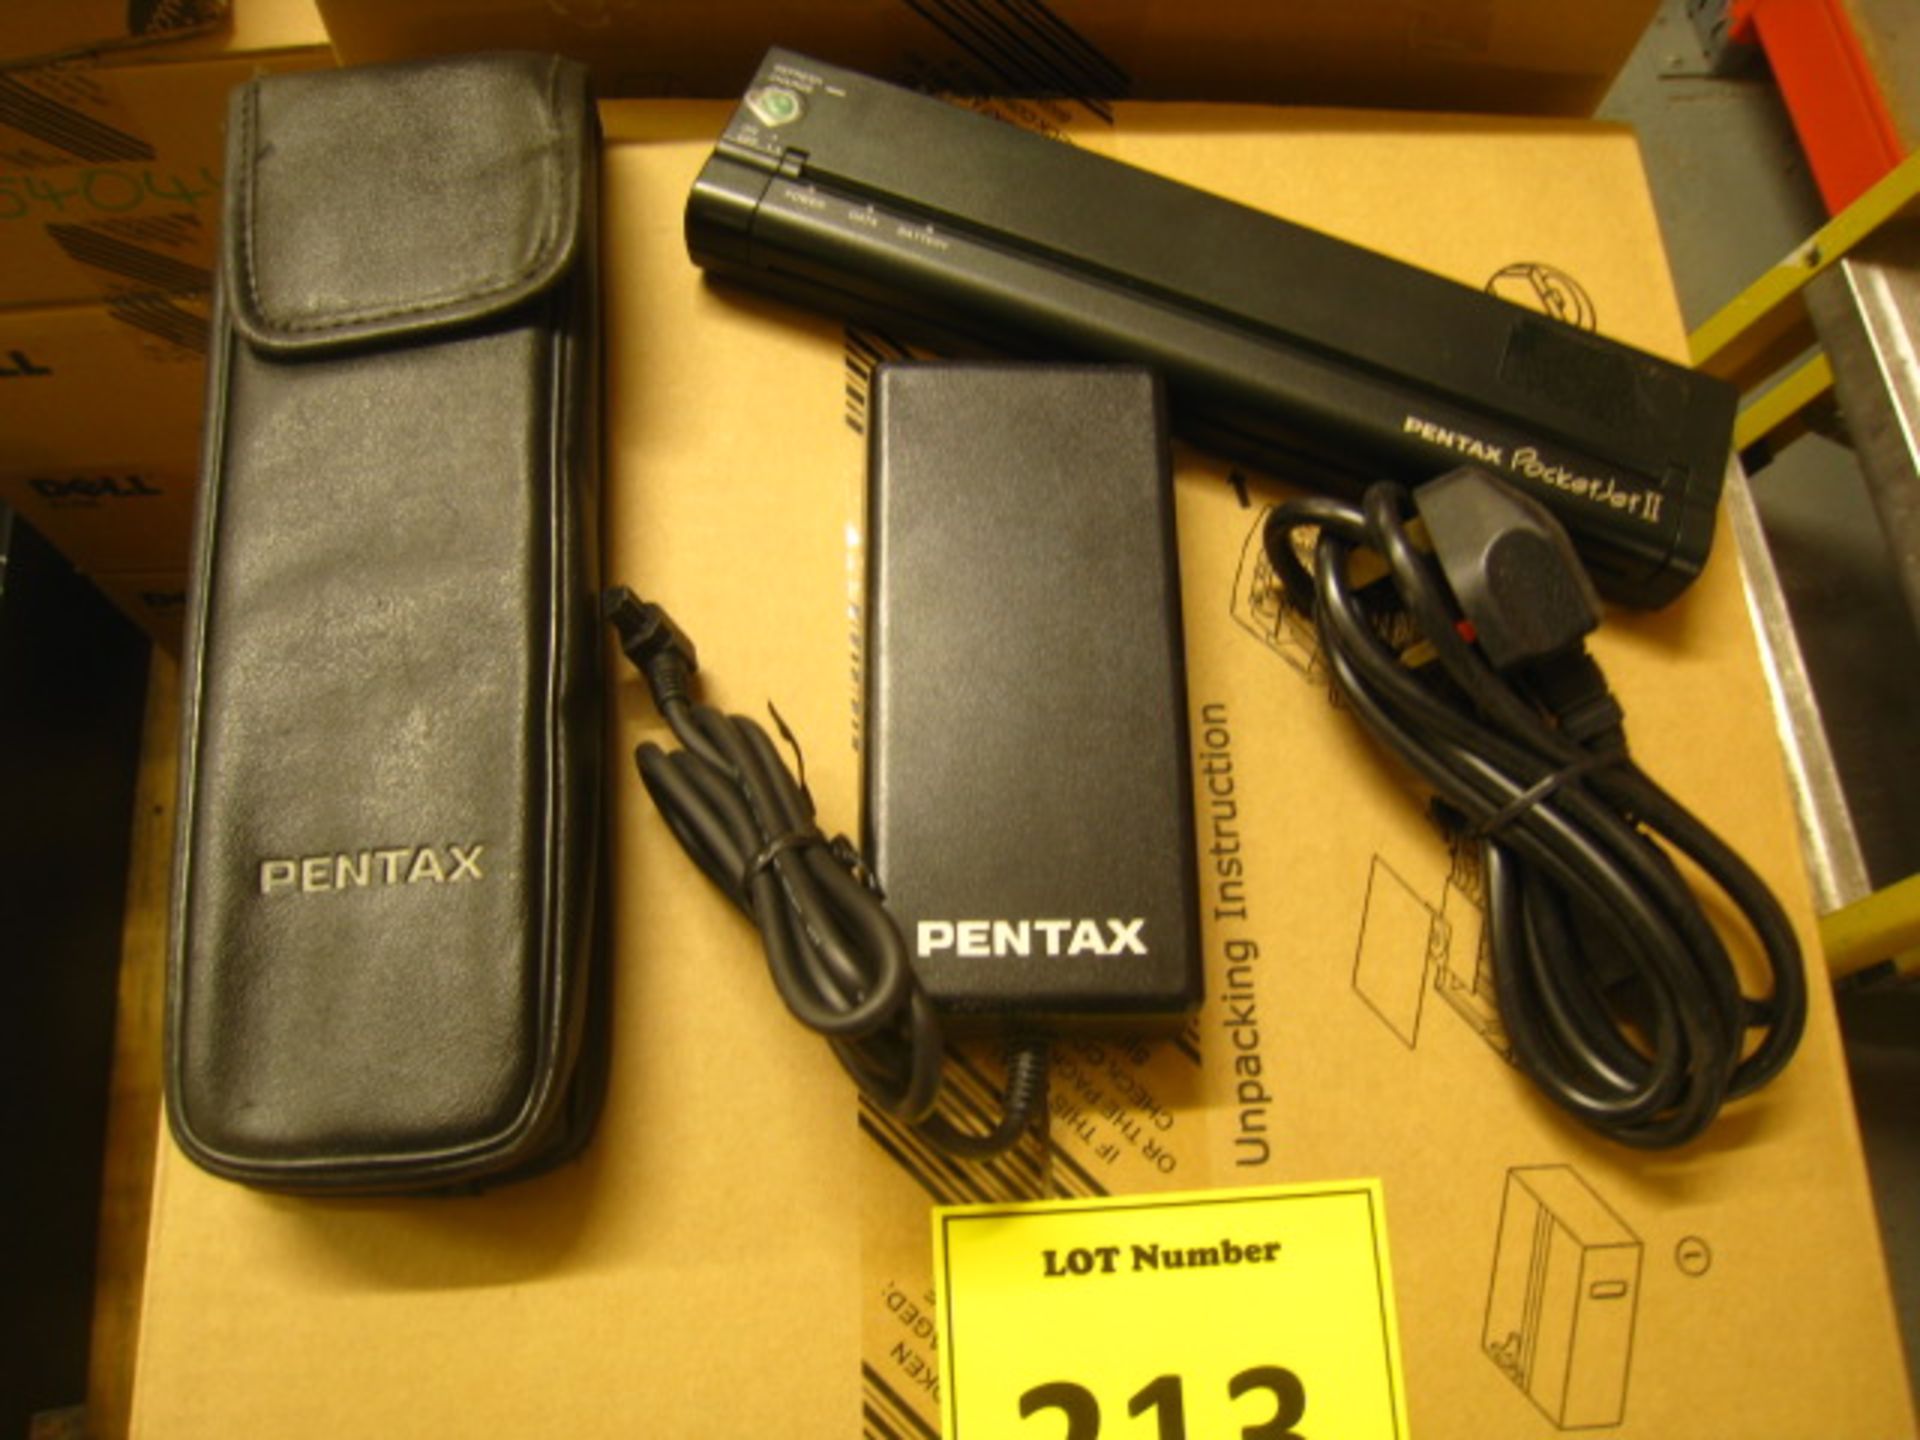 Pentax PocketJet portable thermal printer with carry pouch and power adaptor